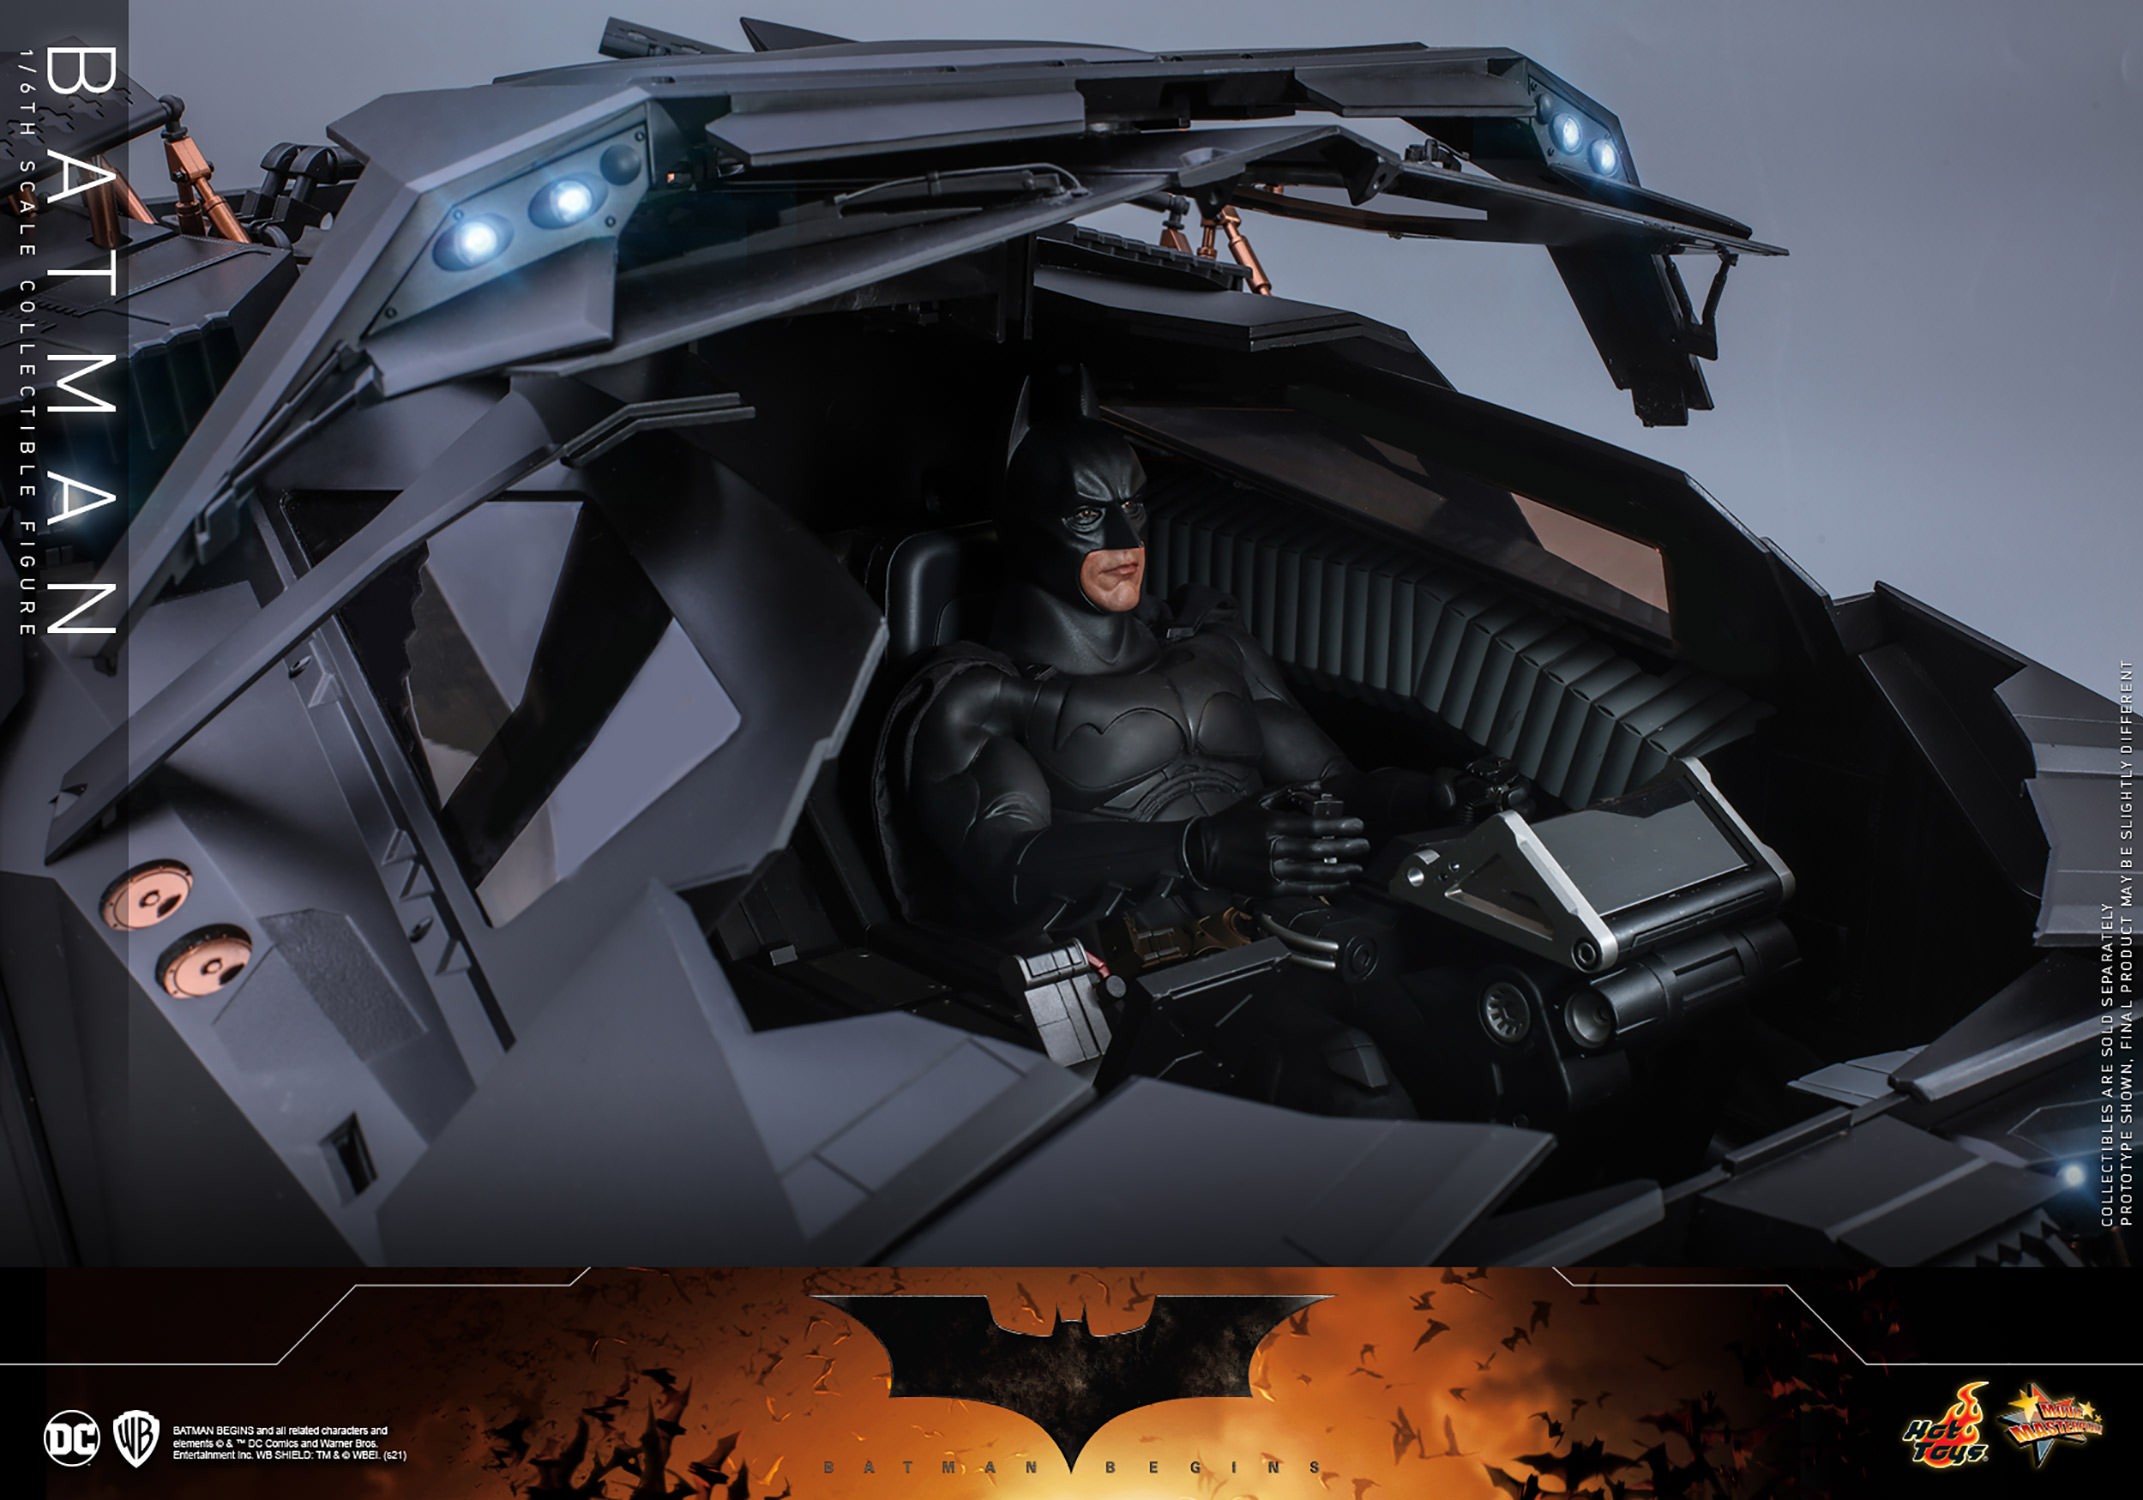 Batman Sixth Scale Collectible Figure by Hot Toys | Sideshow Collectibles